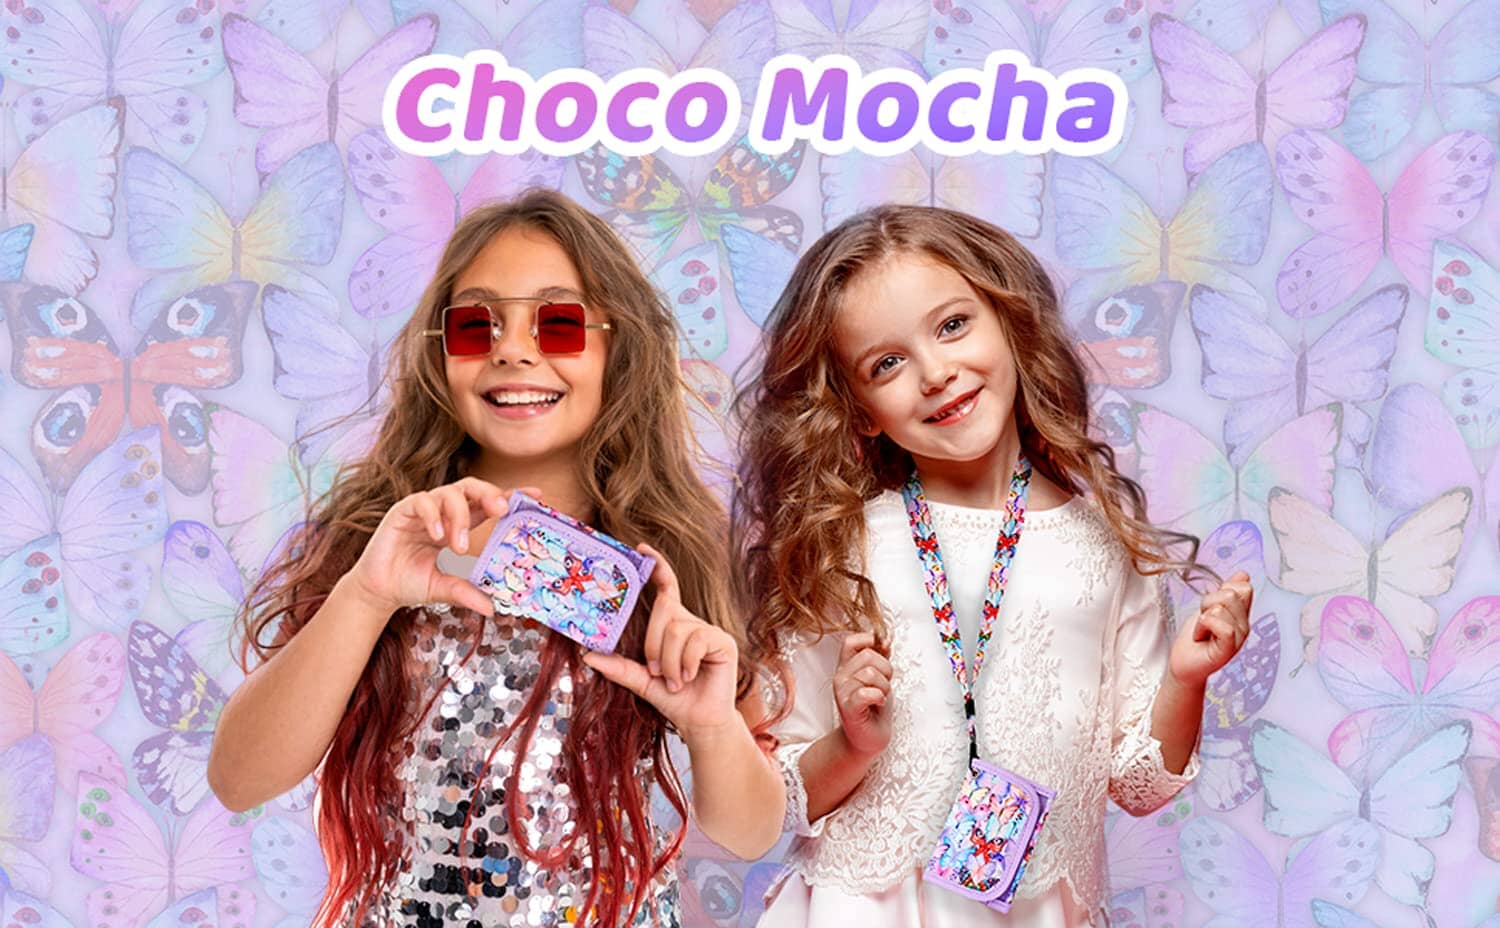 Choco Mocha Butterfly Kids Wallets for Girls Ages 5-7 6-8 9-12, Little Girls Velcro Wallets with Lanyard Gift Box, Christmas Gift for Kids Girls, Colorful chocomochakids 